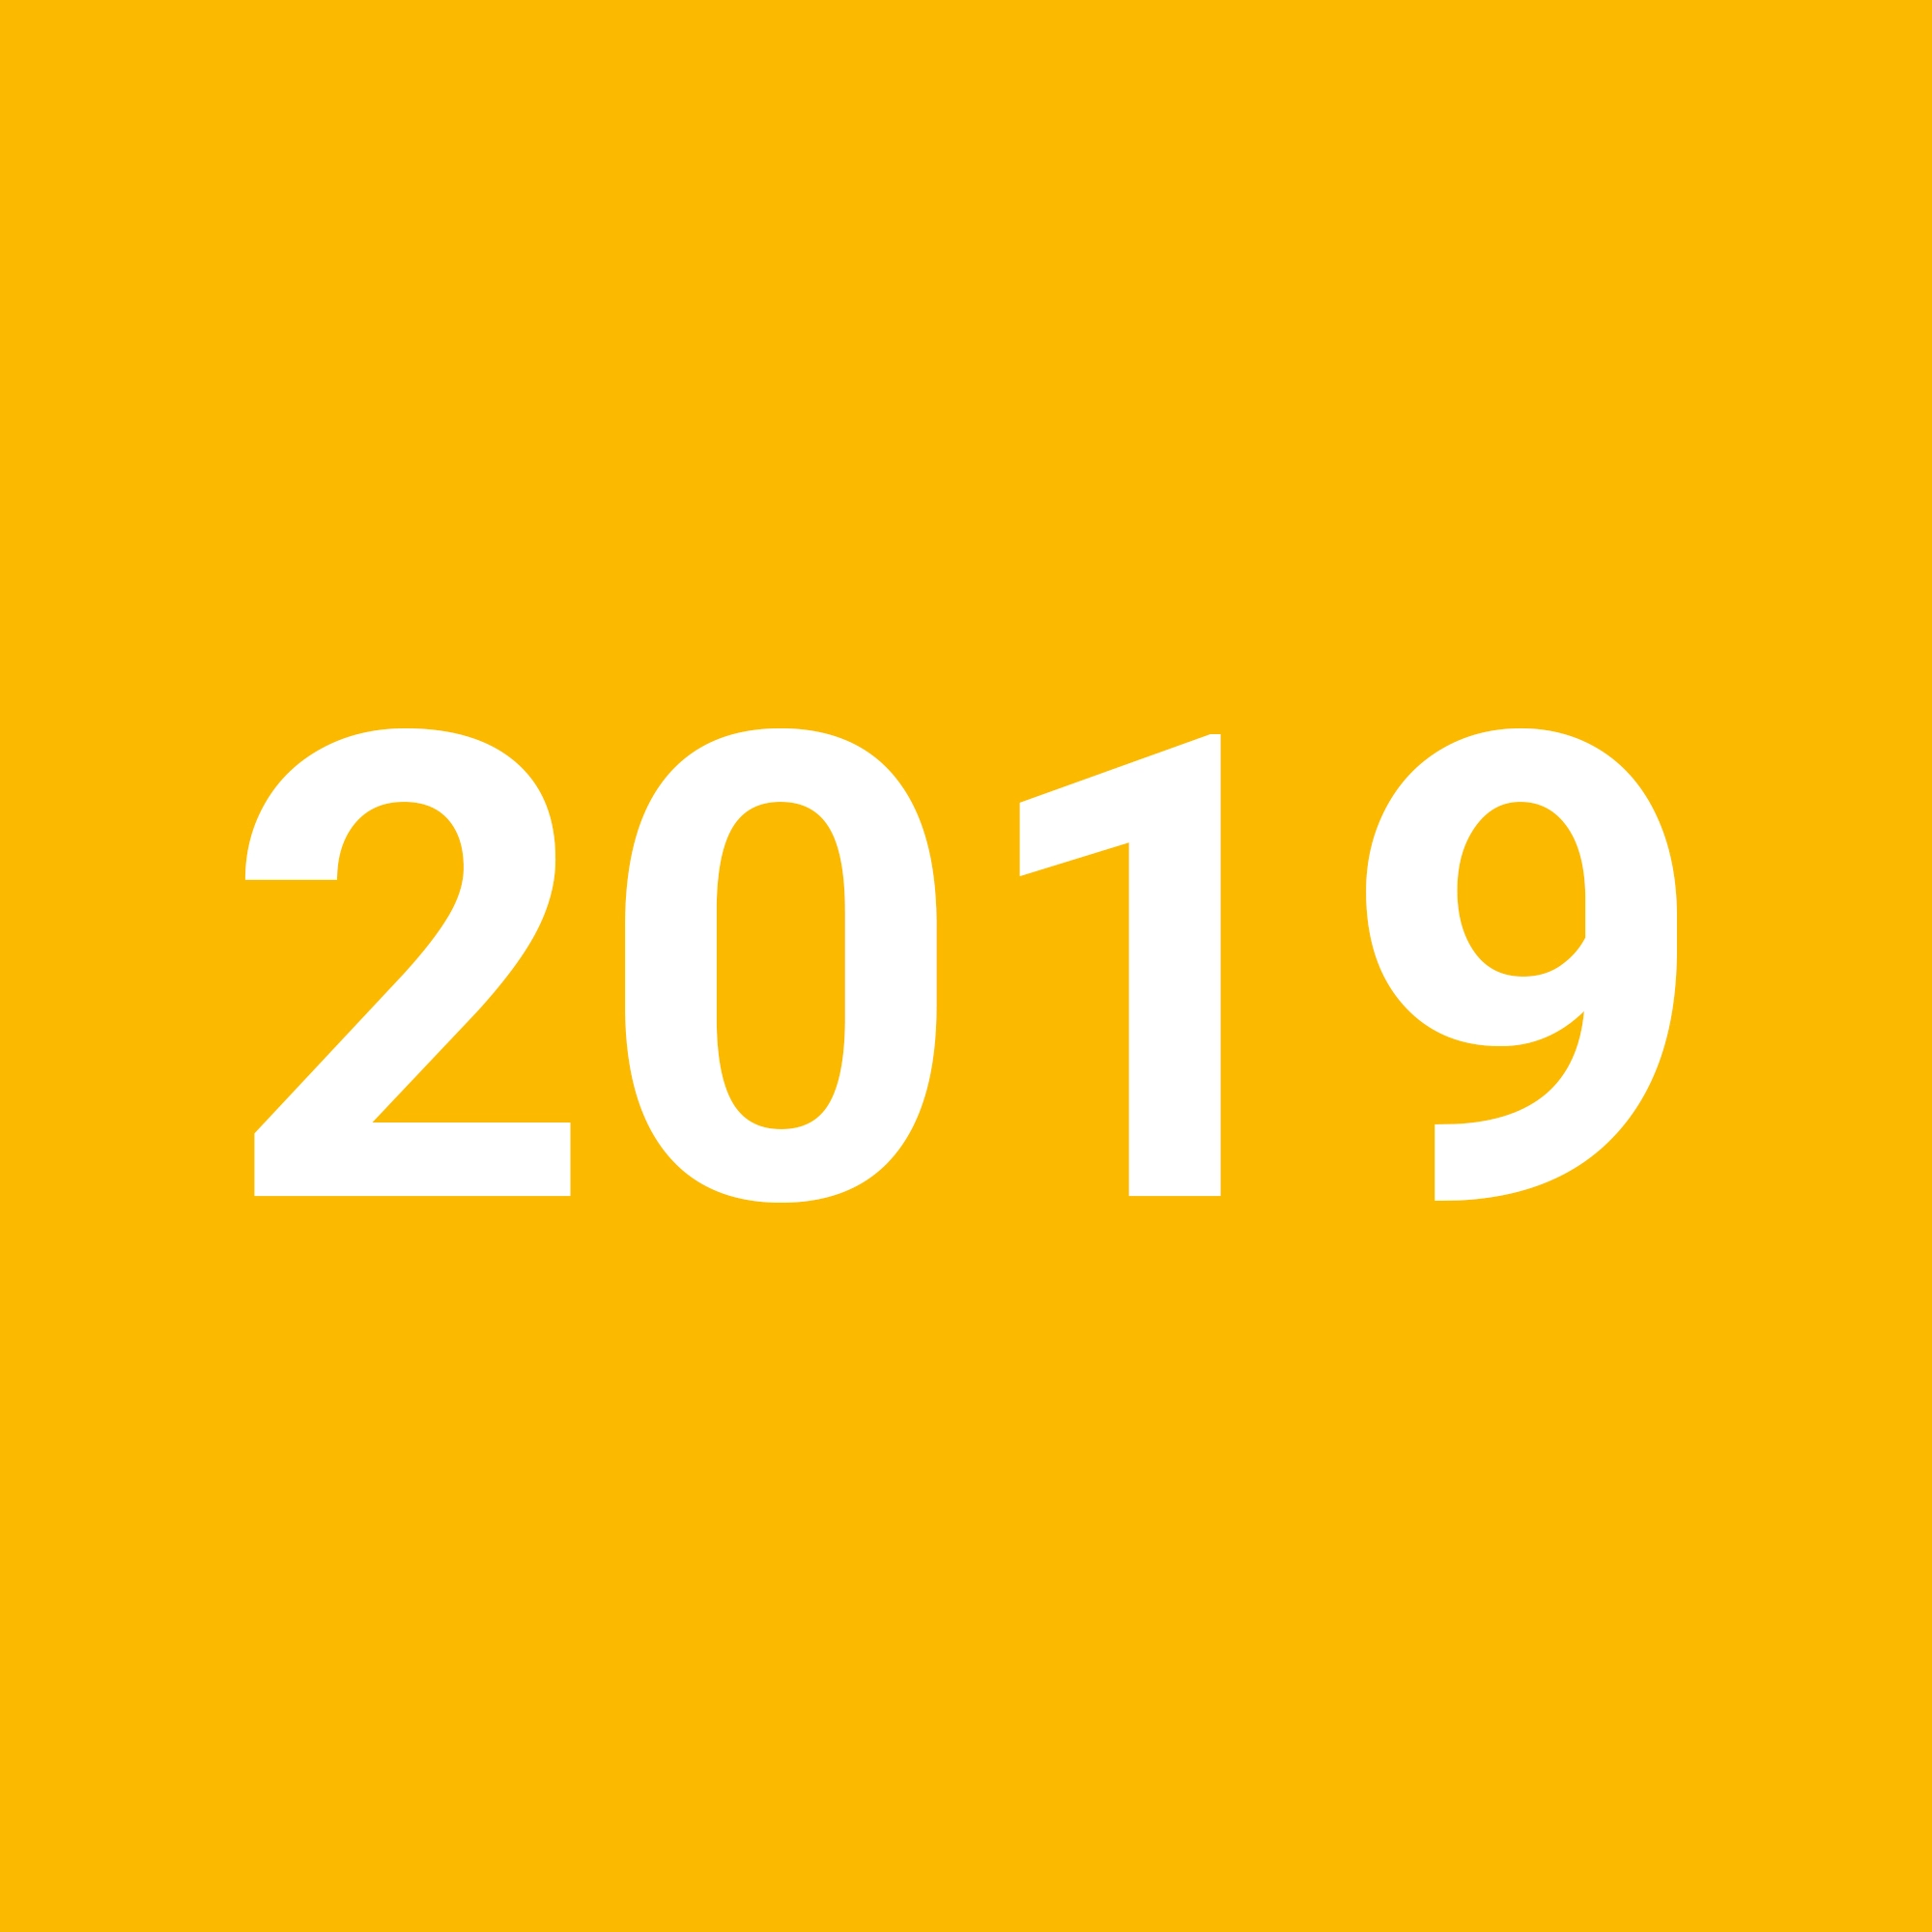 2019 on a yellow background